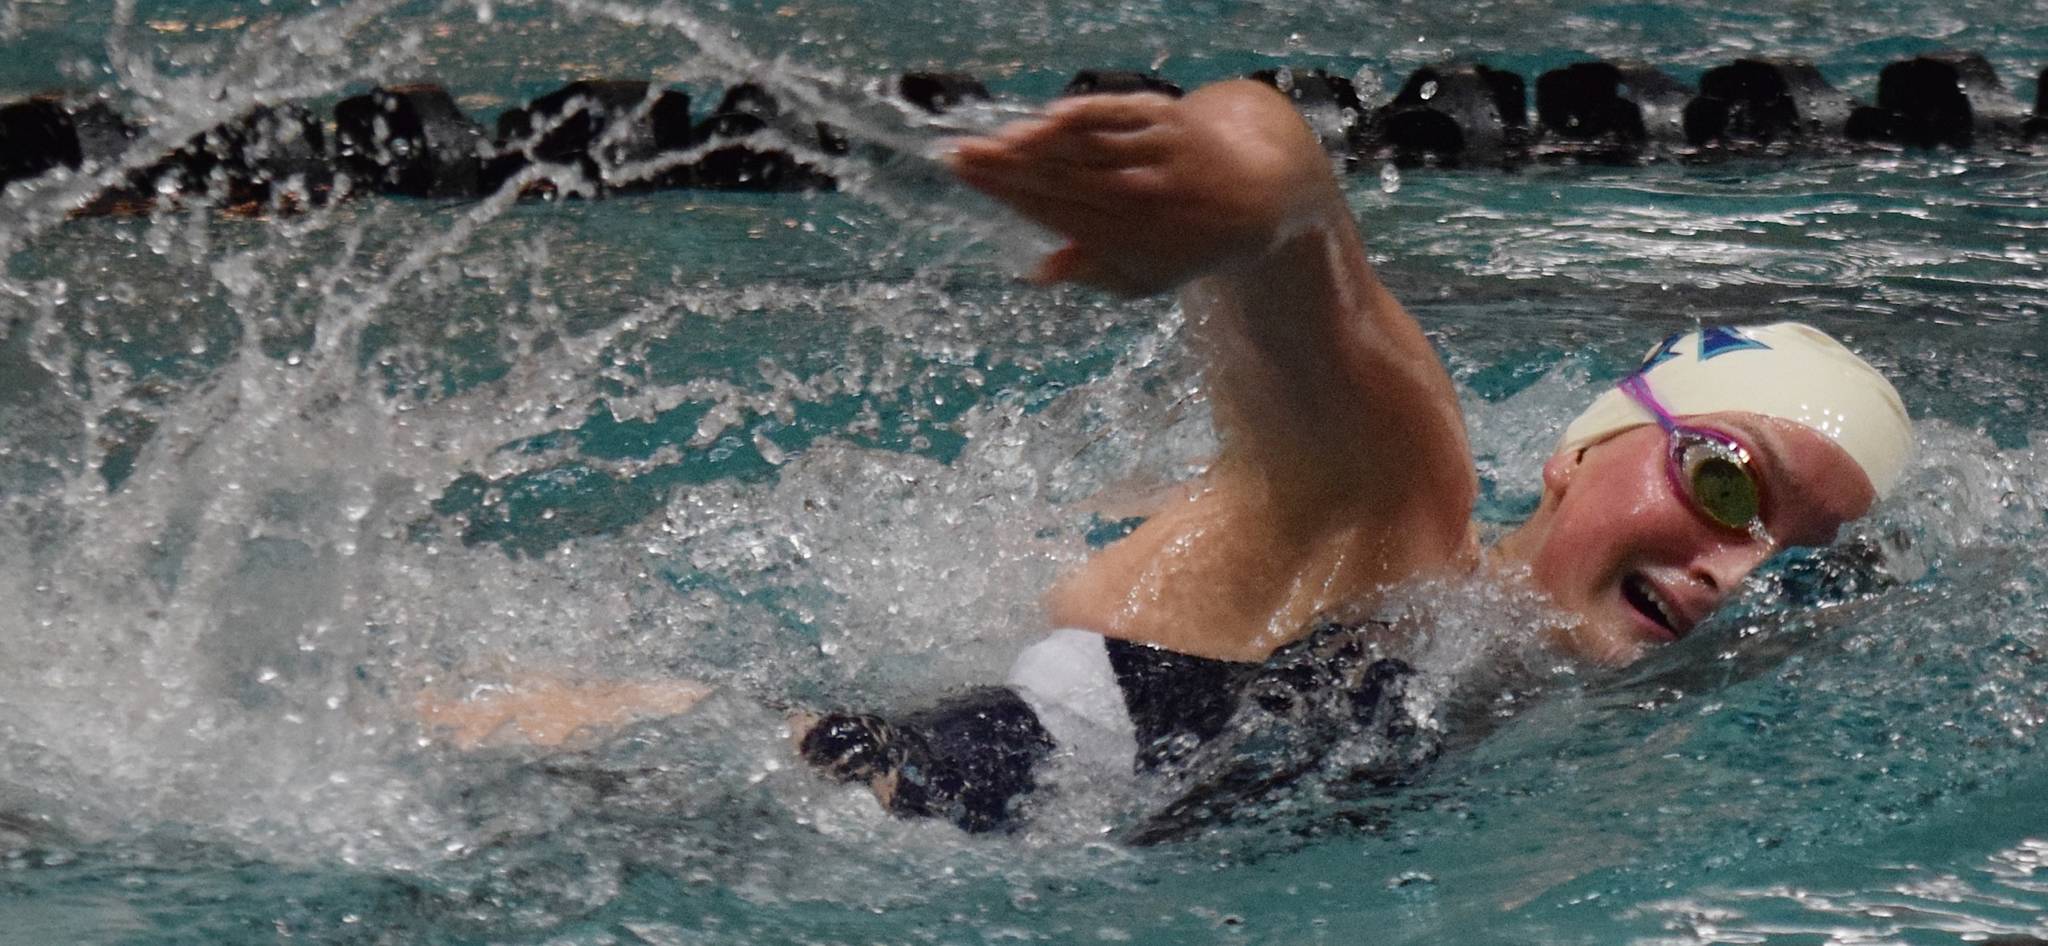 Auburn Riverside’s Kaelie Allan powers her way to victory in the 200-yard freestyle at the All-City meet on Monday. Allan won the event in 2 minutes, 6.74 seconds. RACHEL CIAMPI, Auburn Reporter